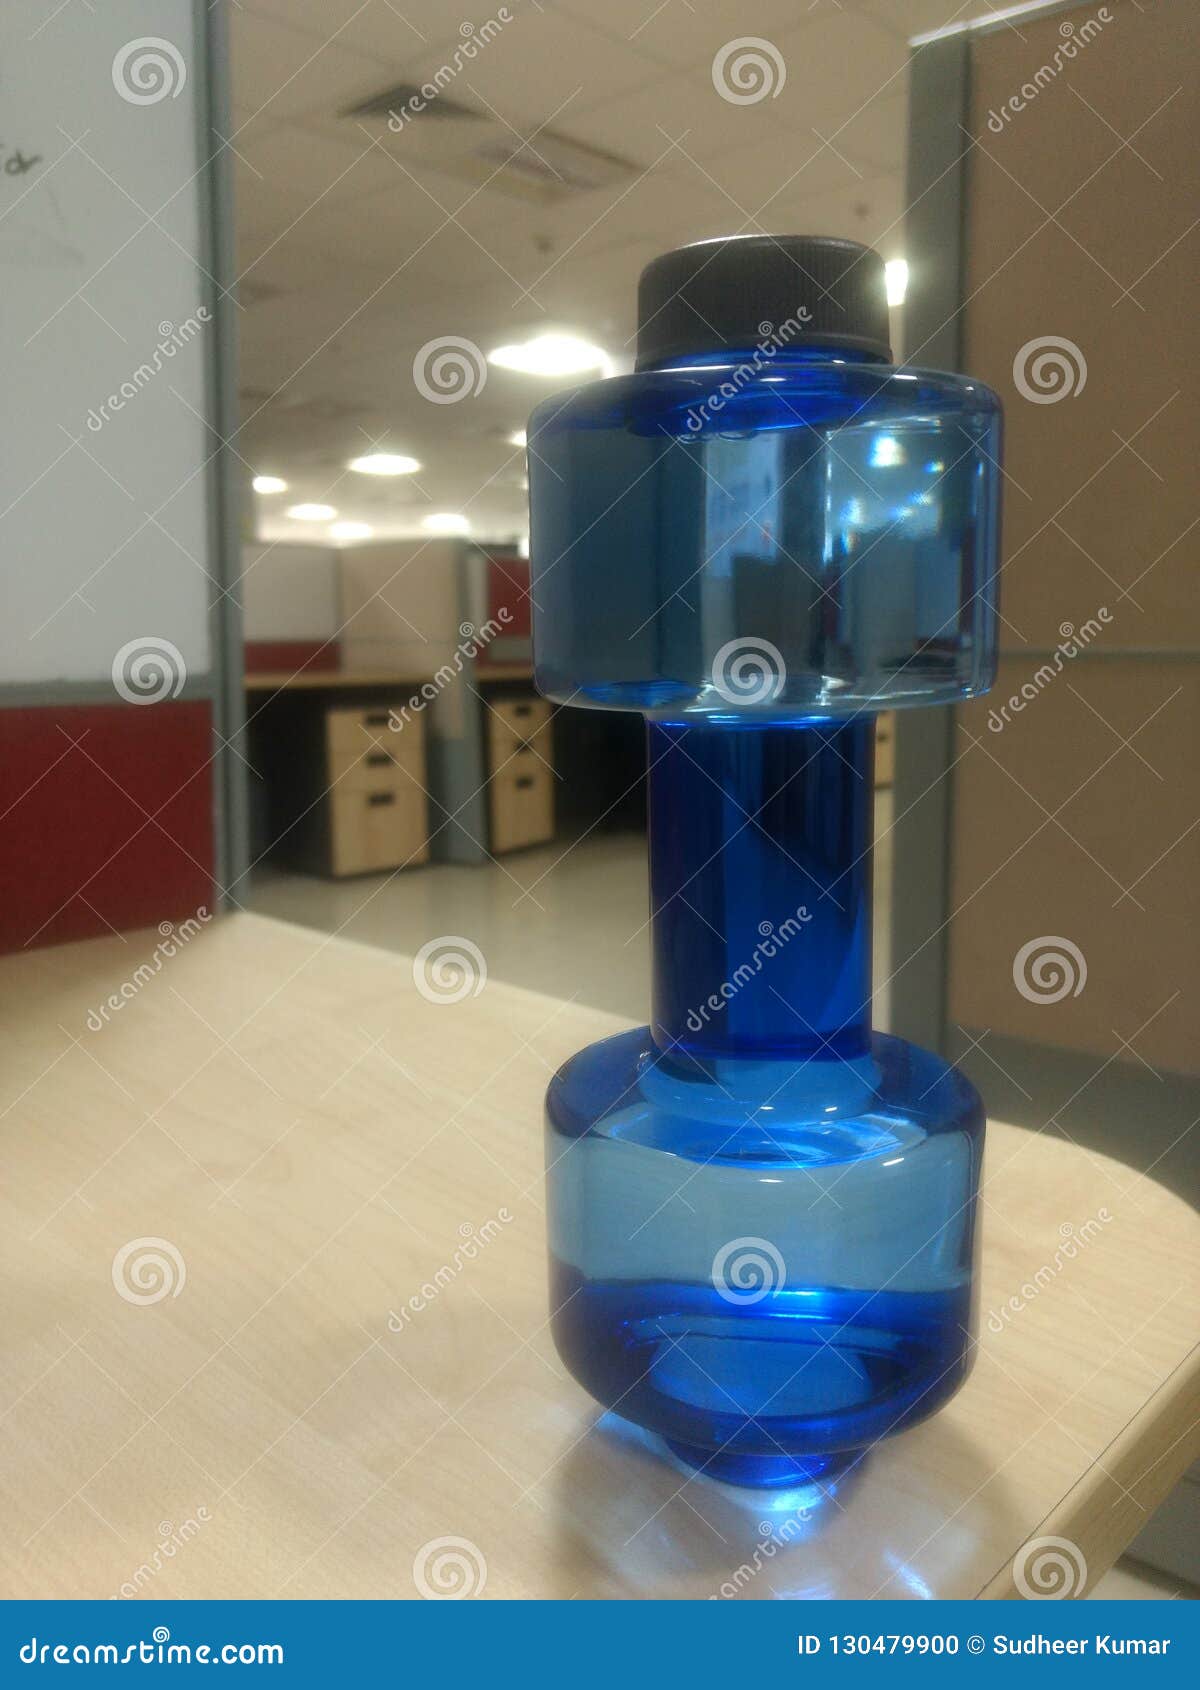 dumbell water bottle in work place